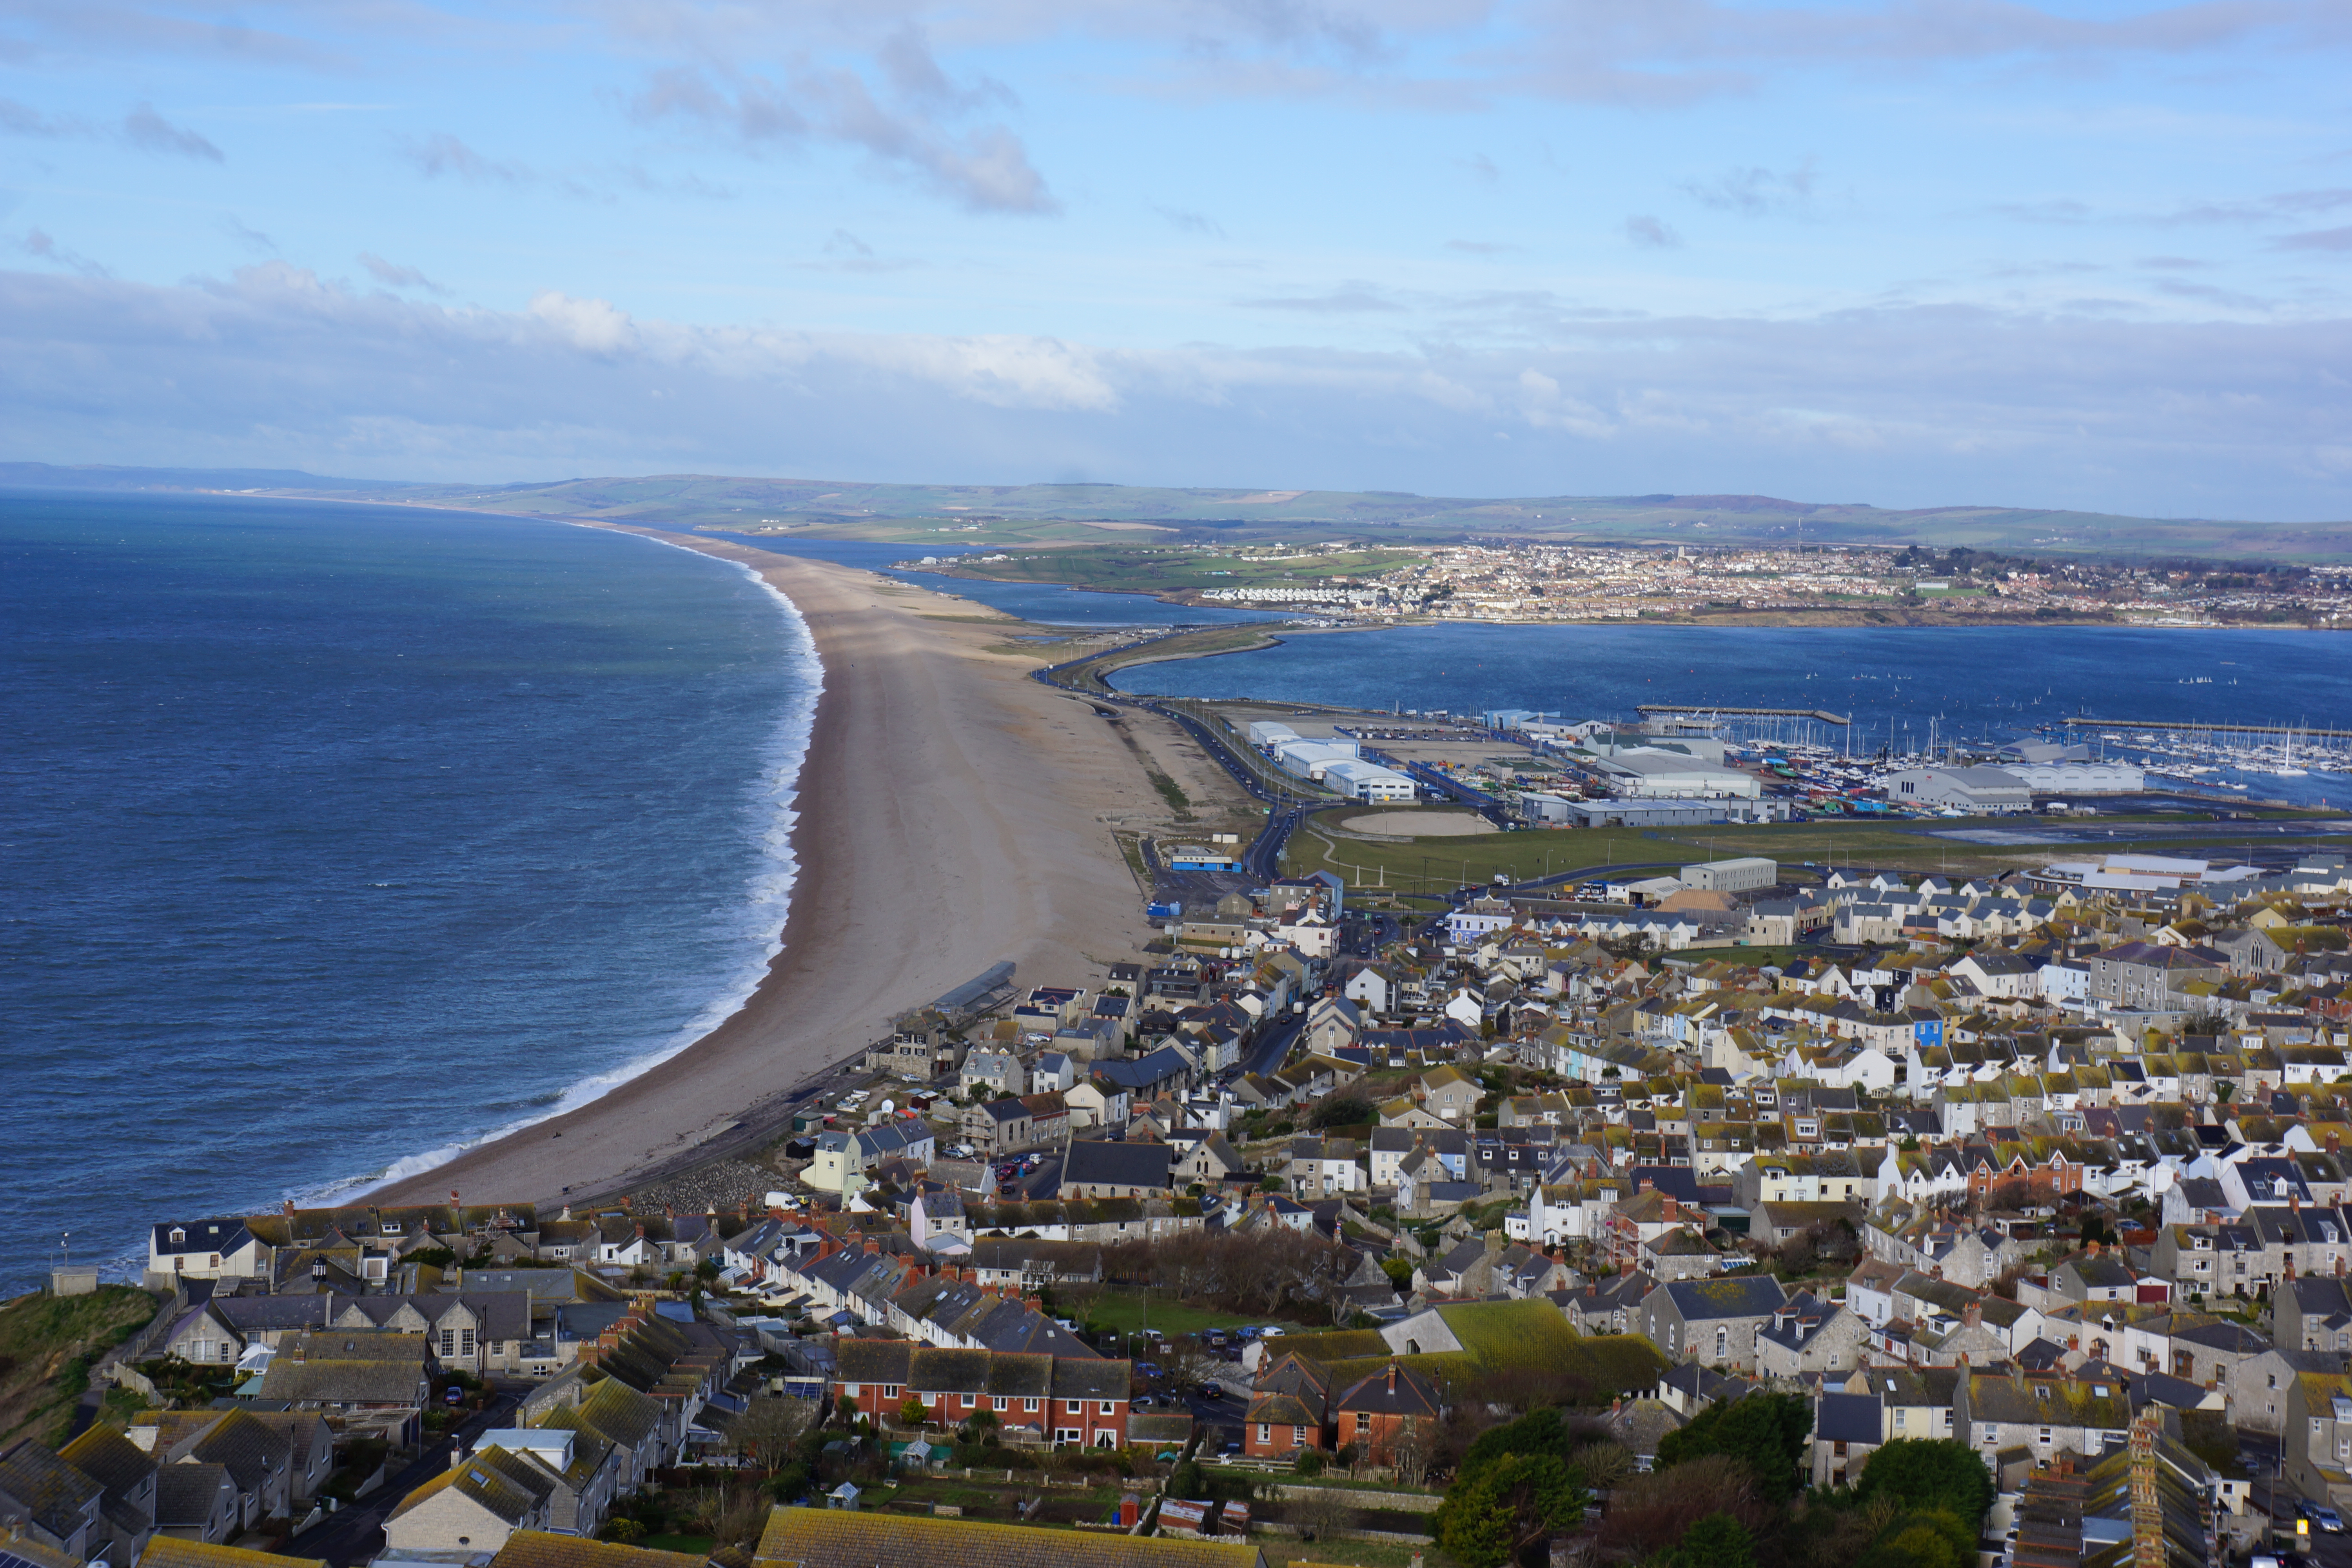  Portland and Chesil Beach for Your Desktop Wallpaper   Anglotopianet 6000x4000